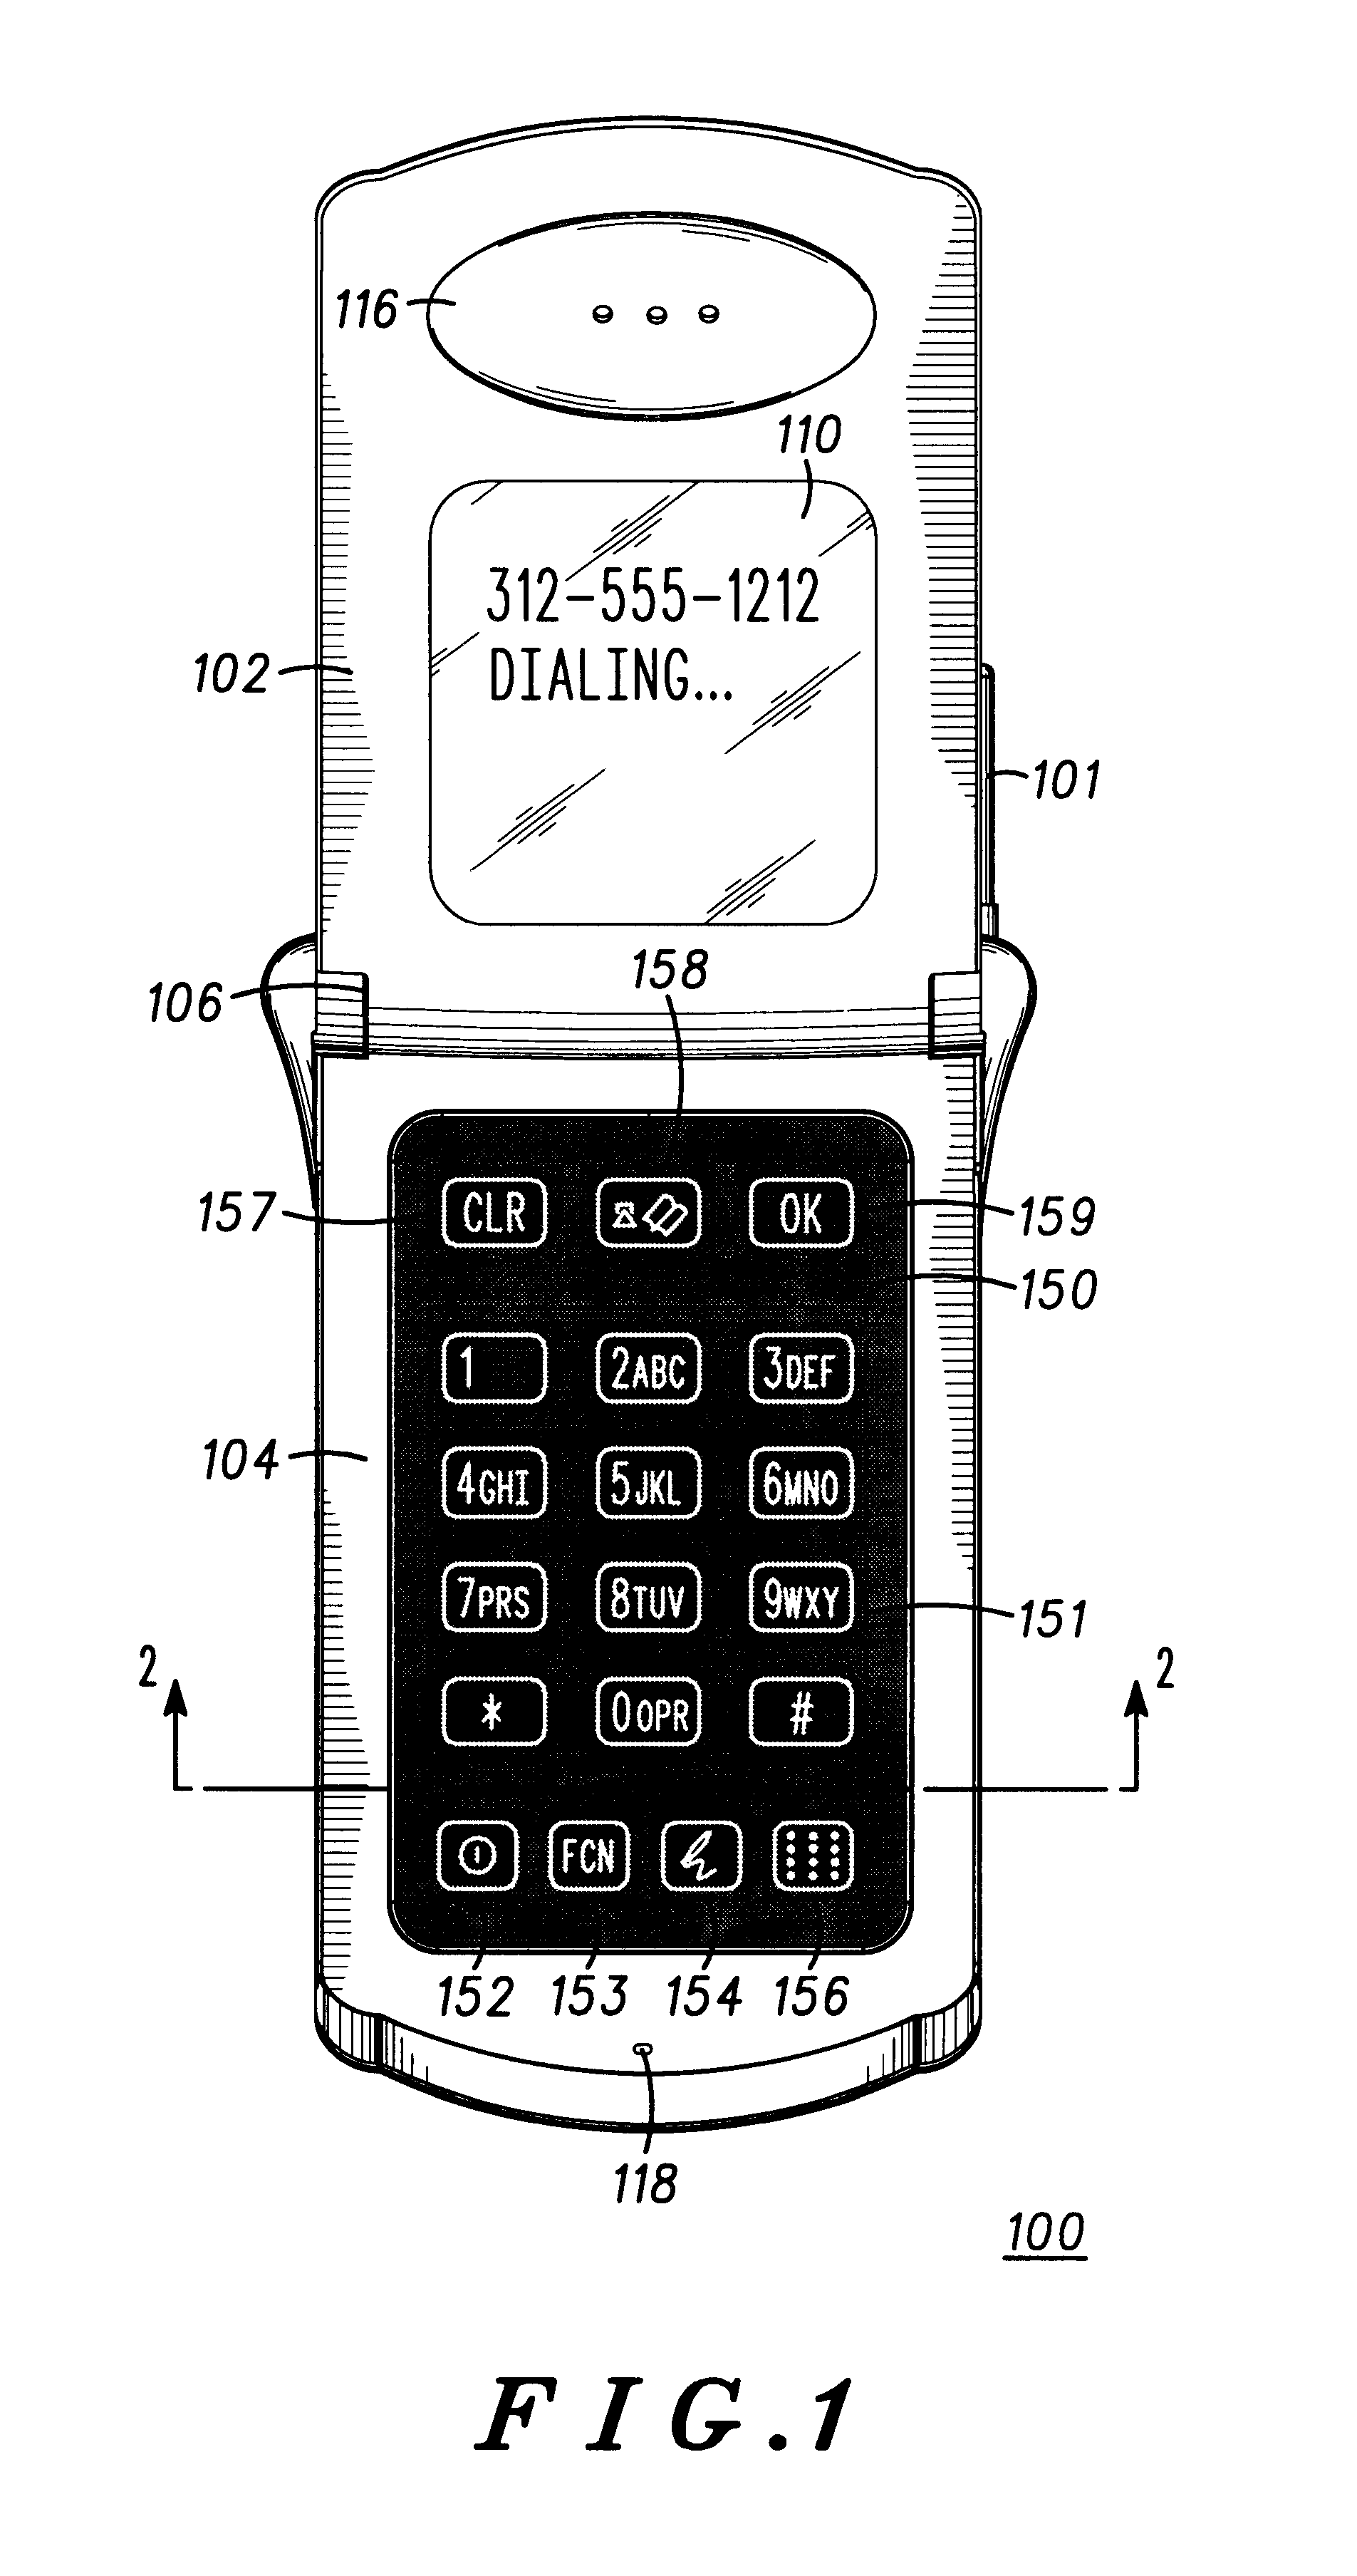 Display with aligned optical shutter and backlight cells applicable for use with a touchscreen